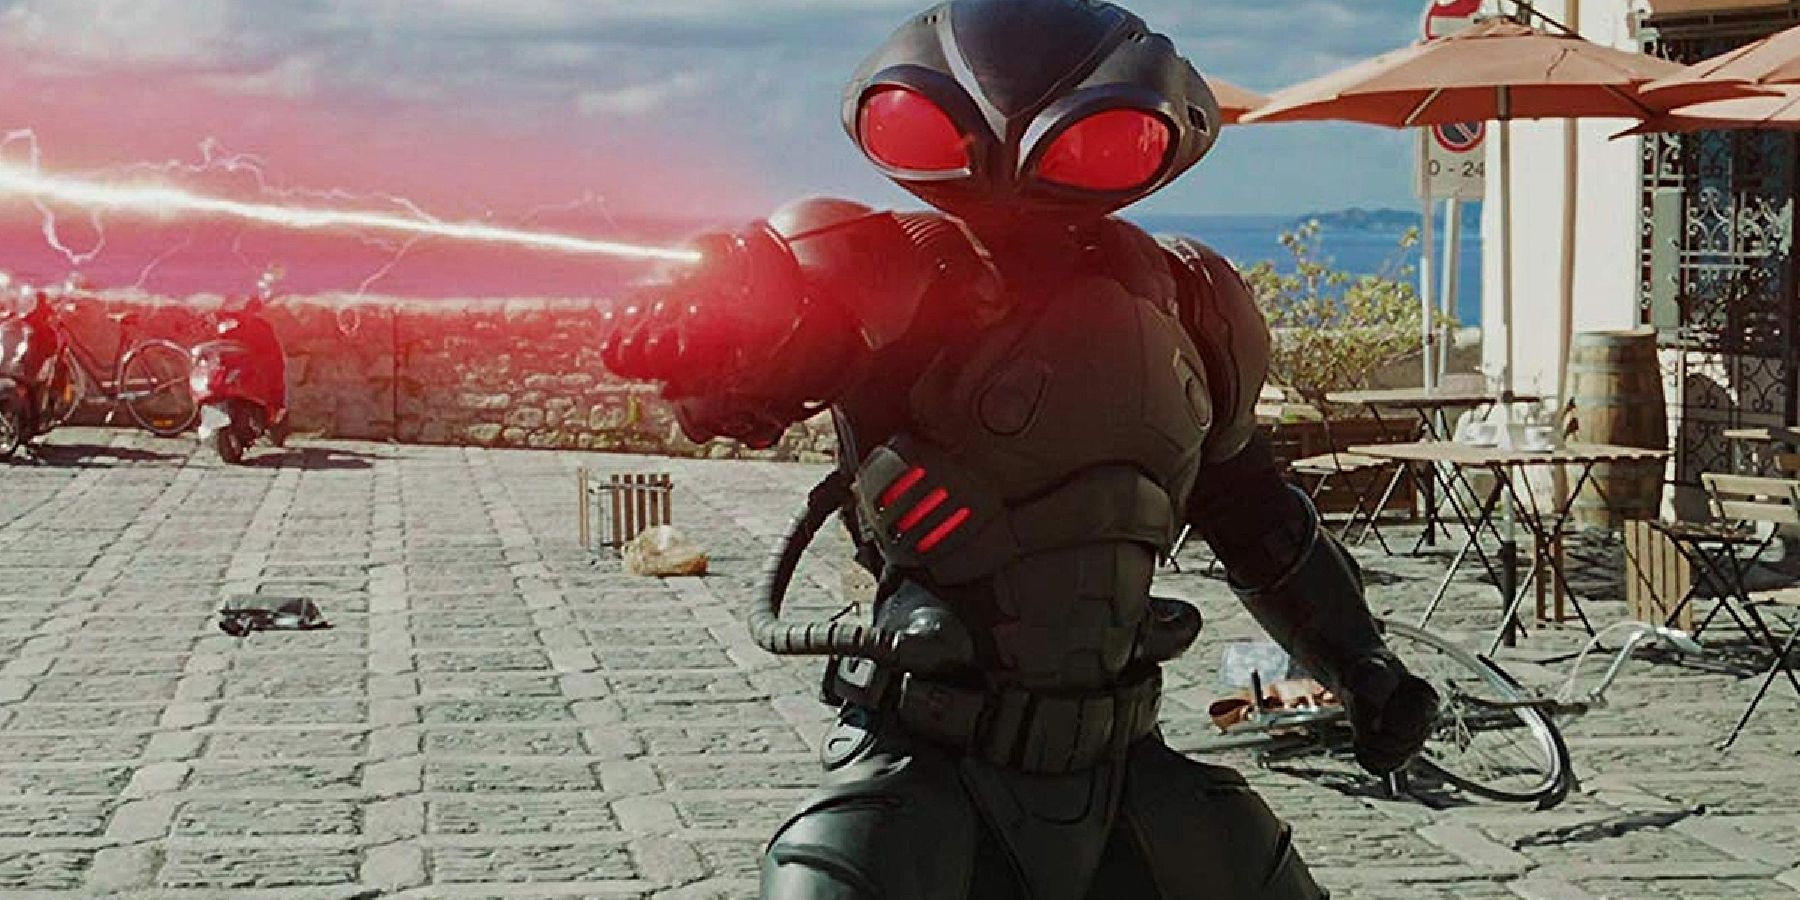 Black Manta shooting a red laser from his wrist